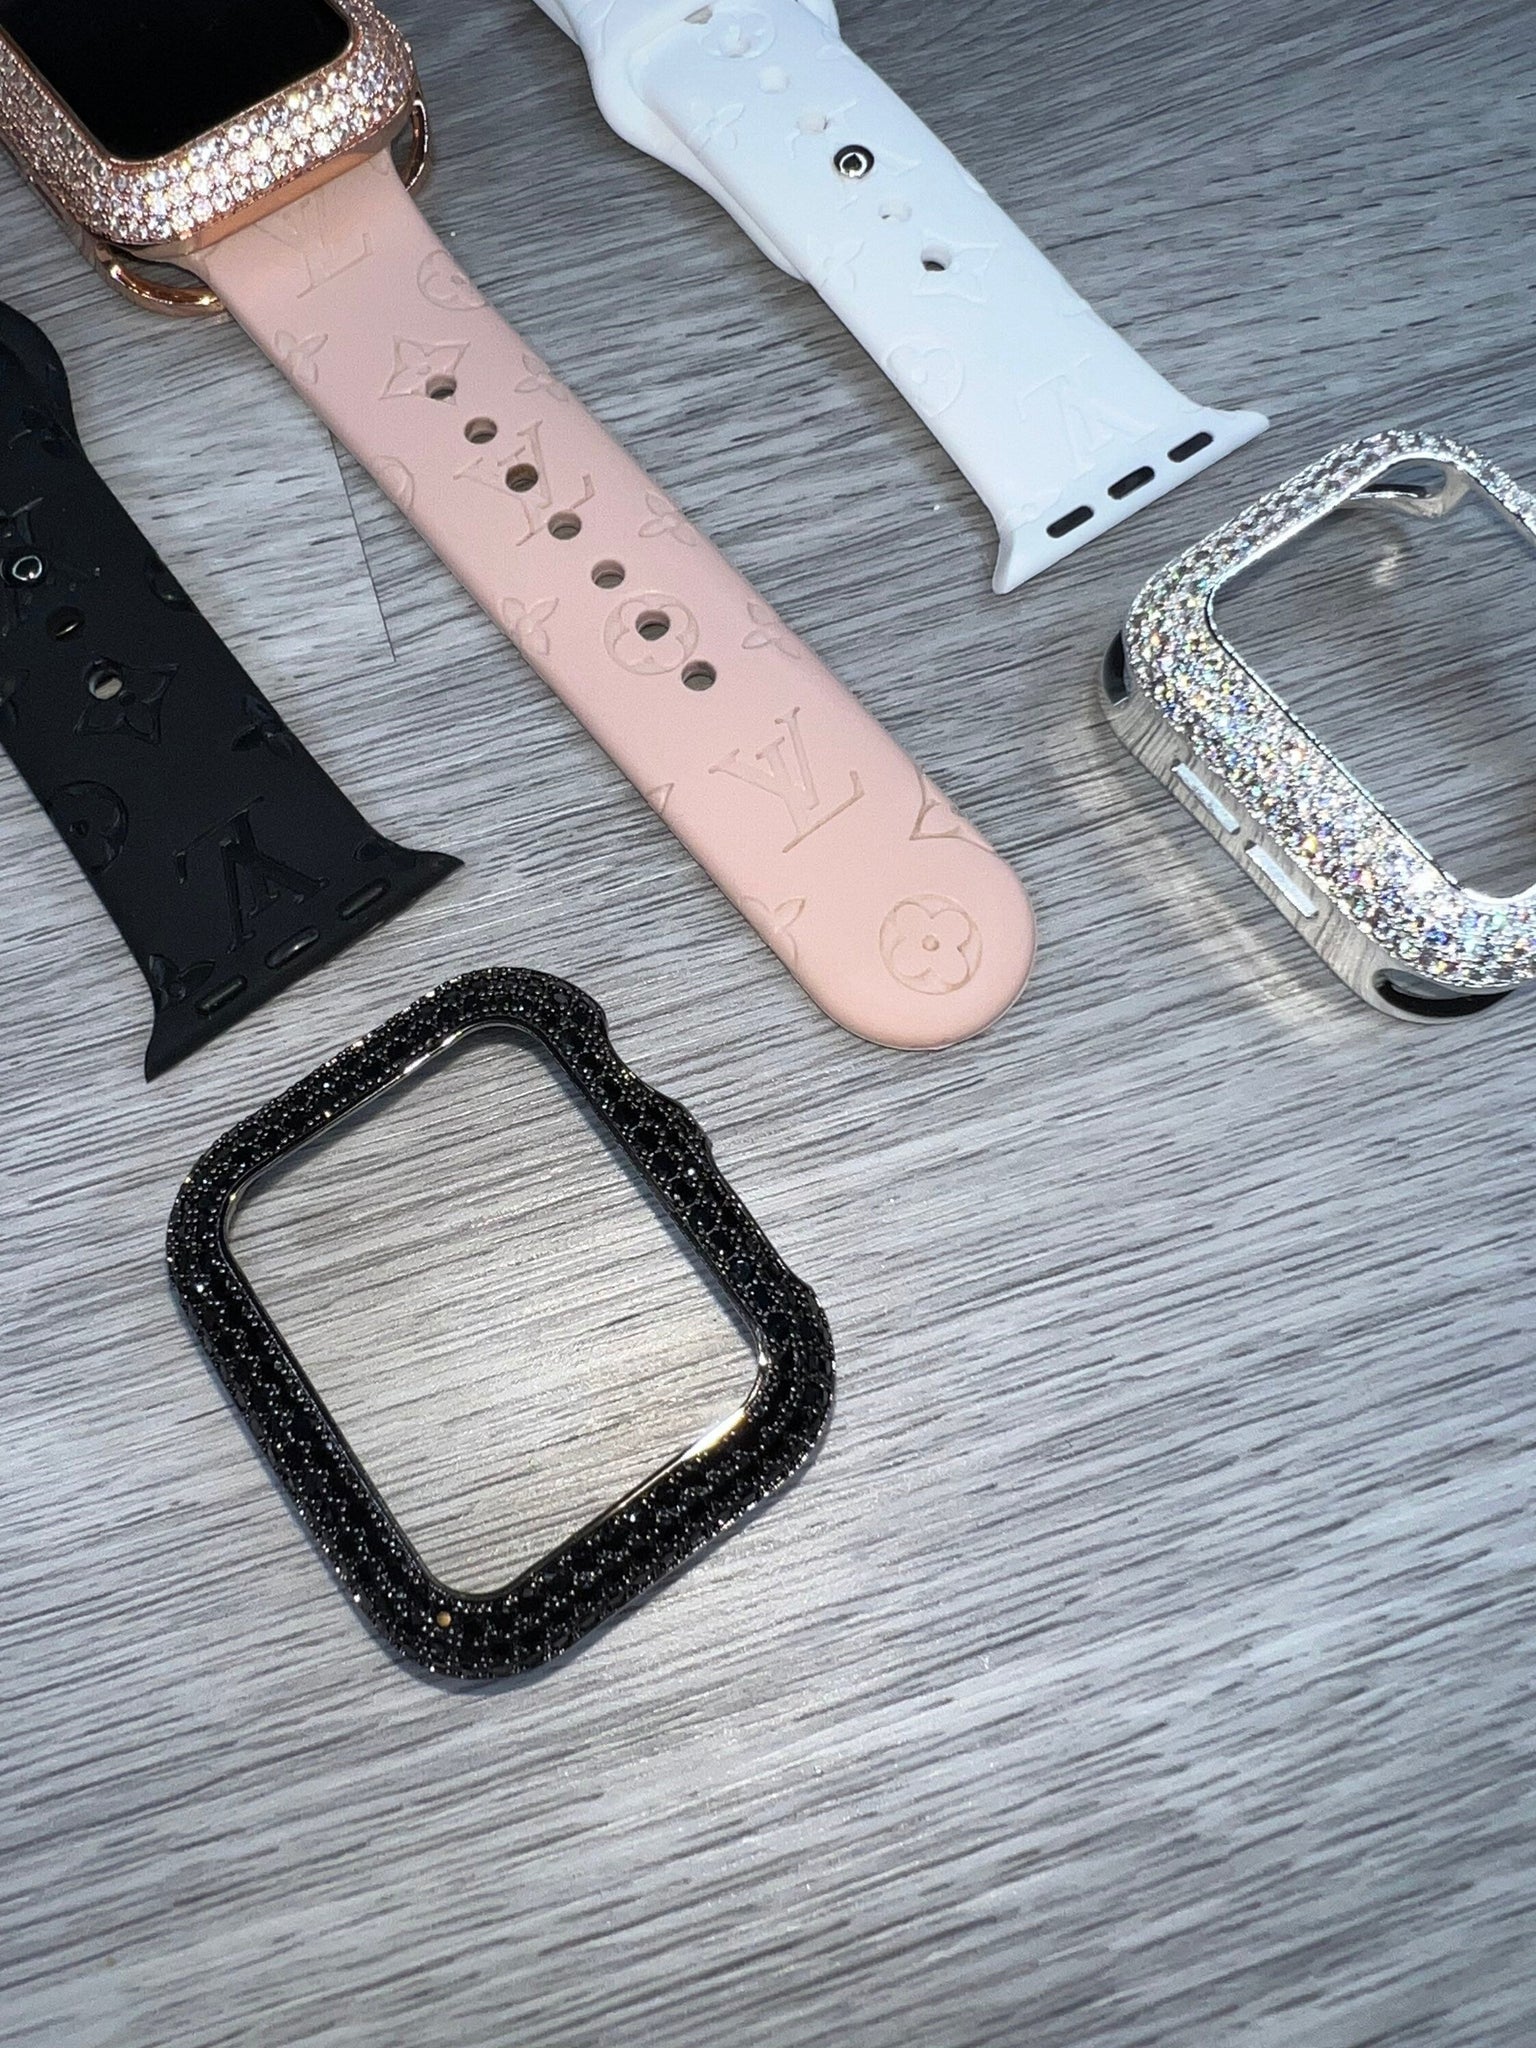 apple watch bands 45mm for women lv